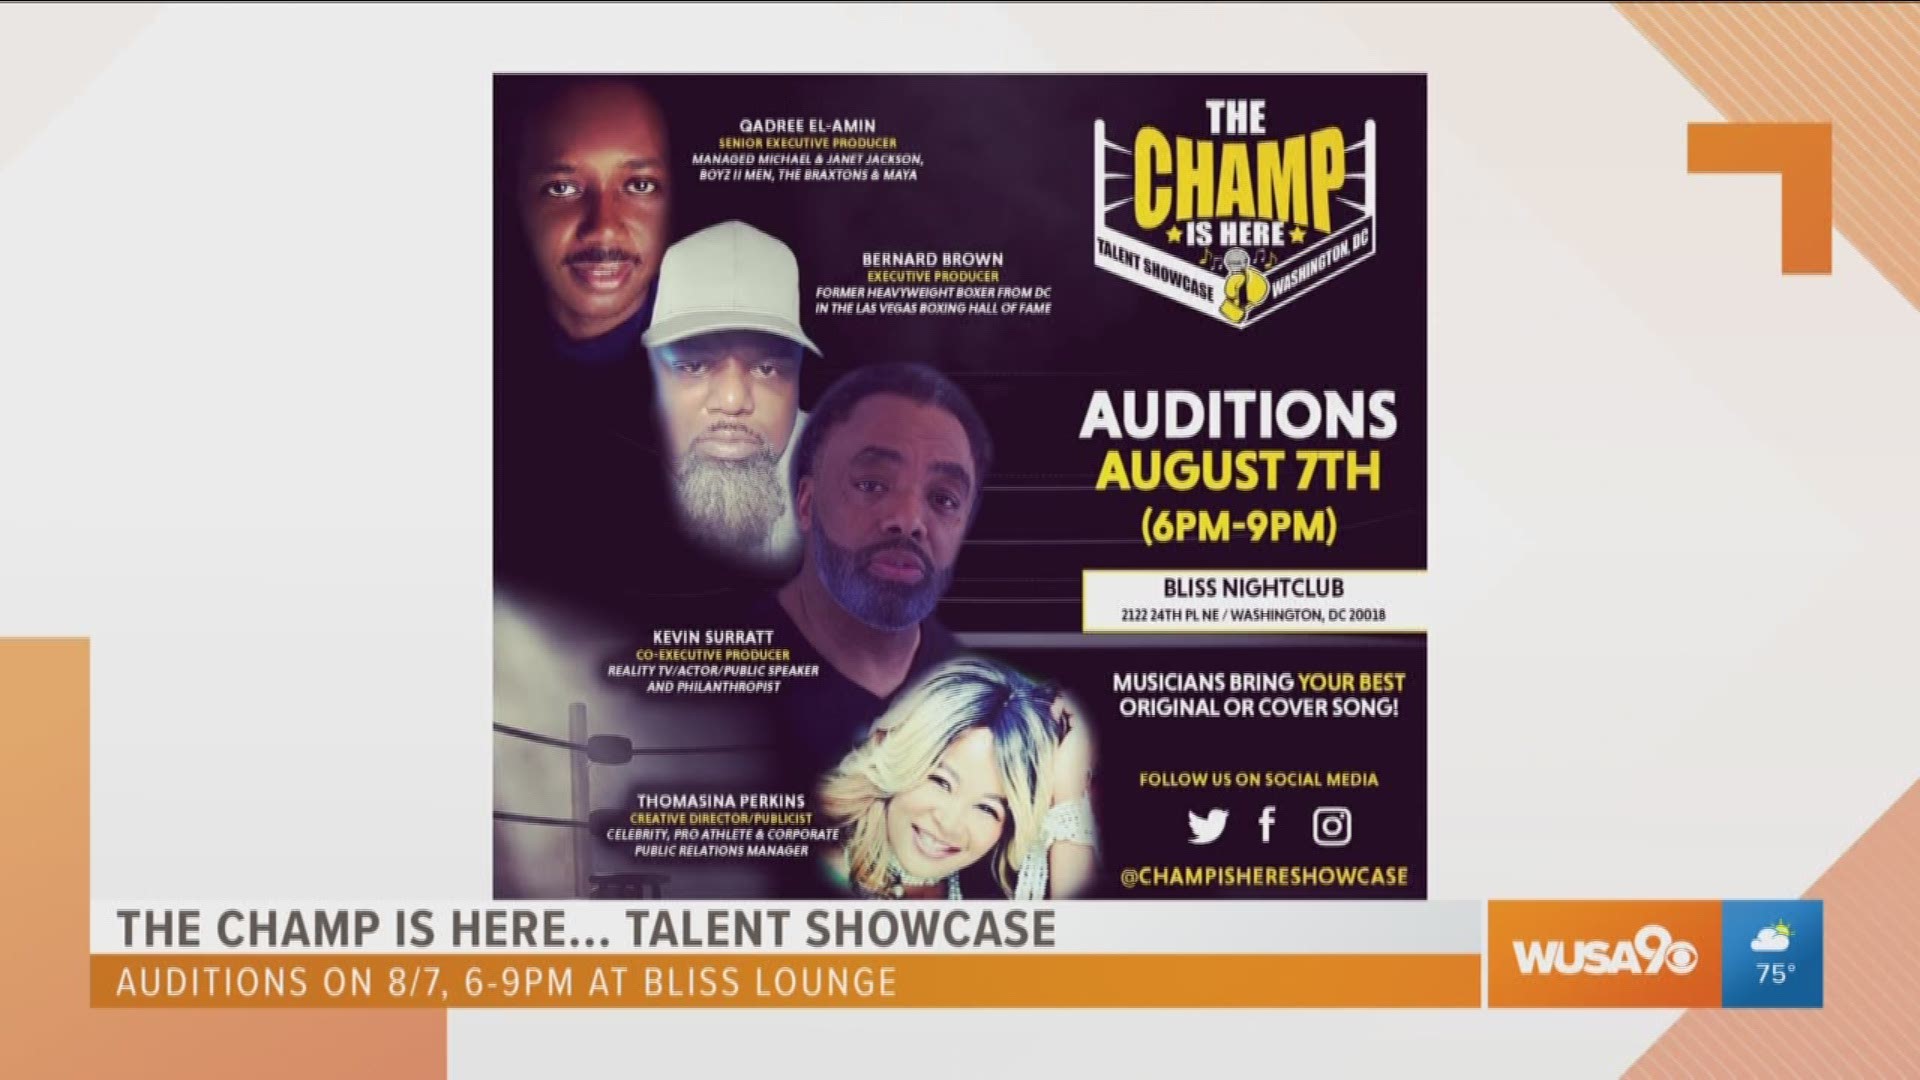 The Champ is here is a talent showcase that is placing the spotlight on the endless talent in the DMV area. Qadree El-Amin, Bernhard Brown, Kevin Surratt and Thomasina Perkins all weigh in on the showcase and the importance it holds. For questions regarding the showcase, email inquires@capitolpublicrelations.com and include Champ in the subject line.